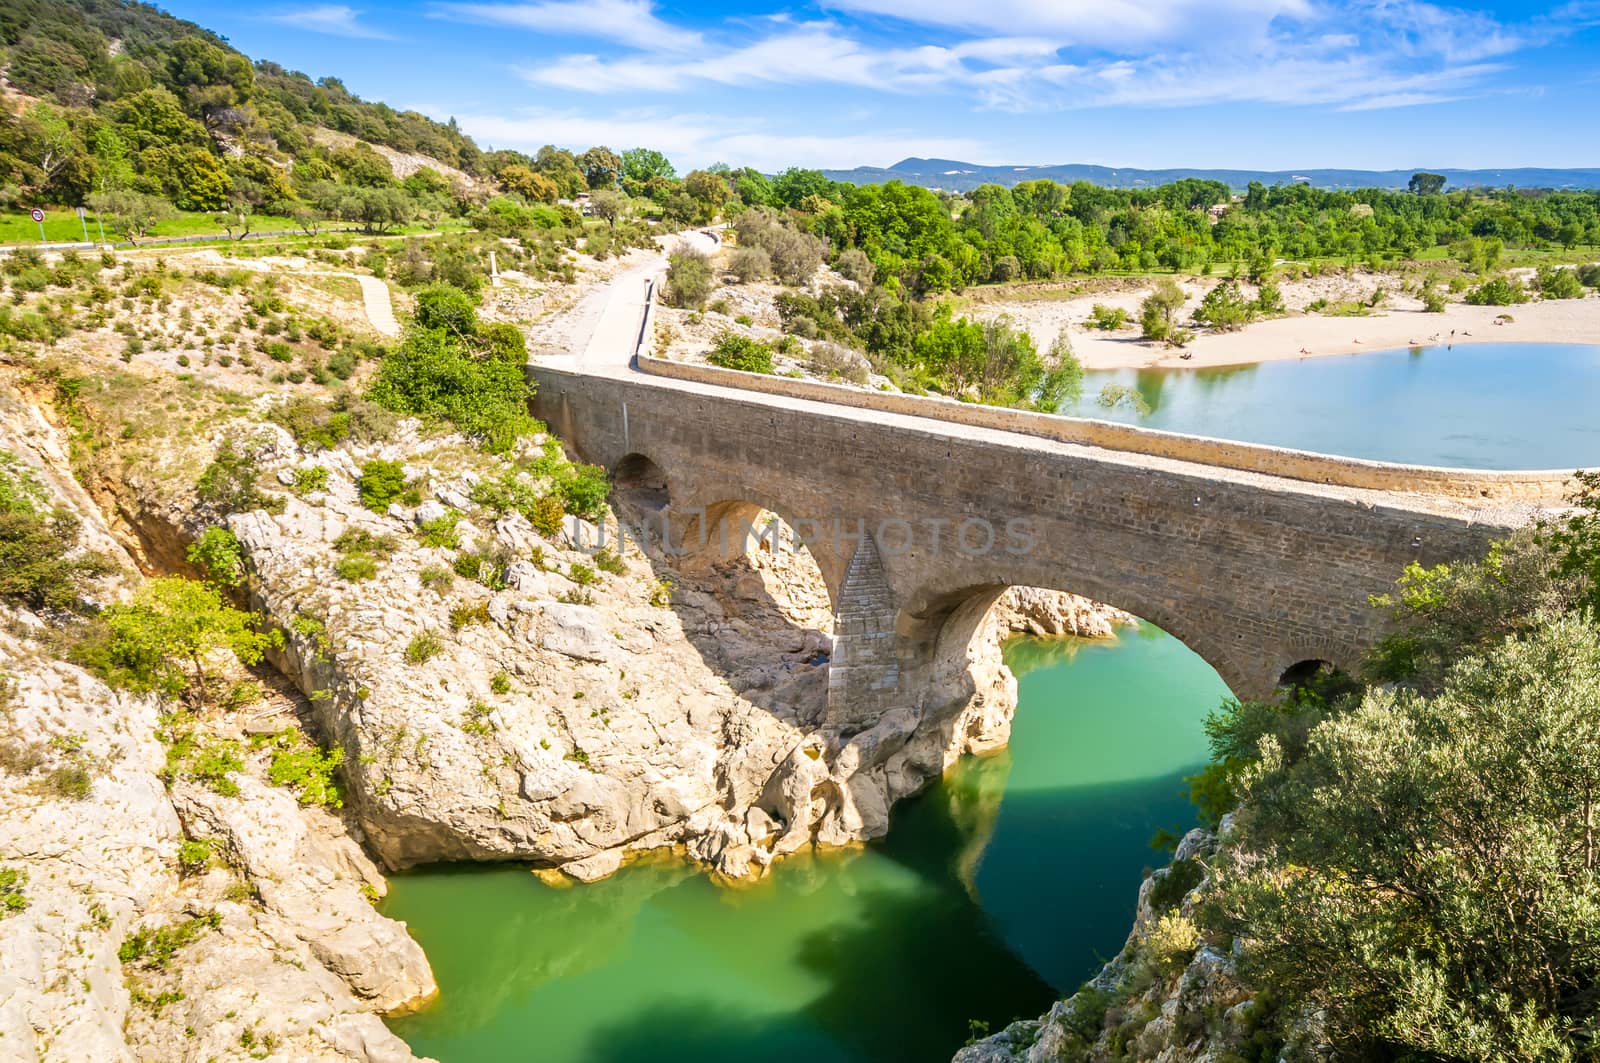 The Pont du Diable or bridge over the Hérault is a construction of Romanesque architecture located on the Hérault river, between the municipalities of Aniane and Saint-Jean-de-Fos, in the Hérault department in France.